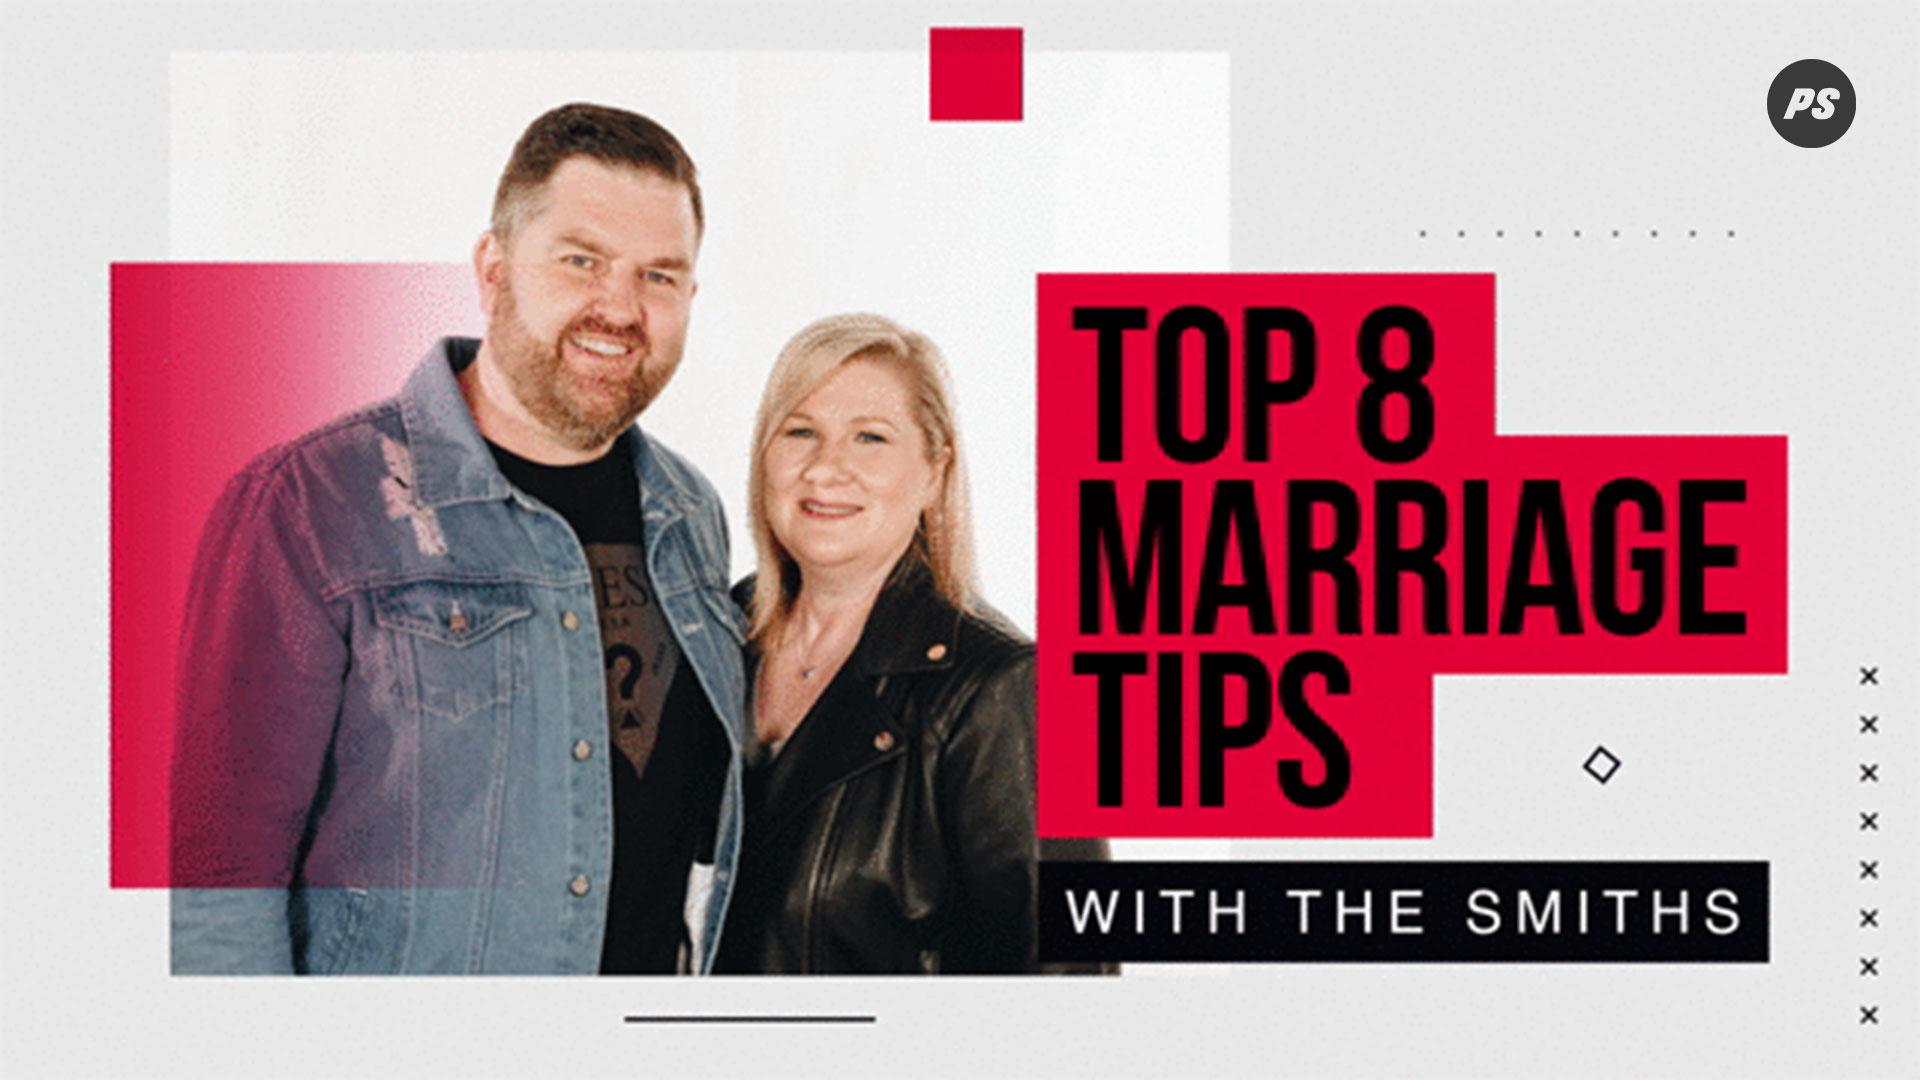 Featured image for “Top 8 Marriage Tips with the Smiths”